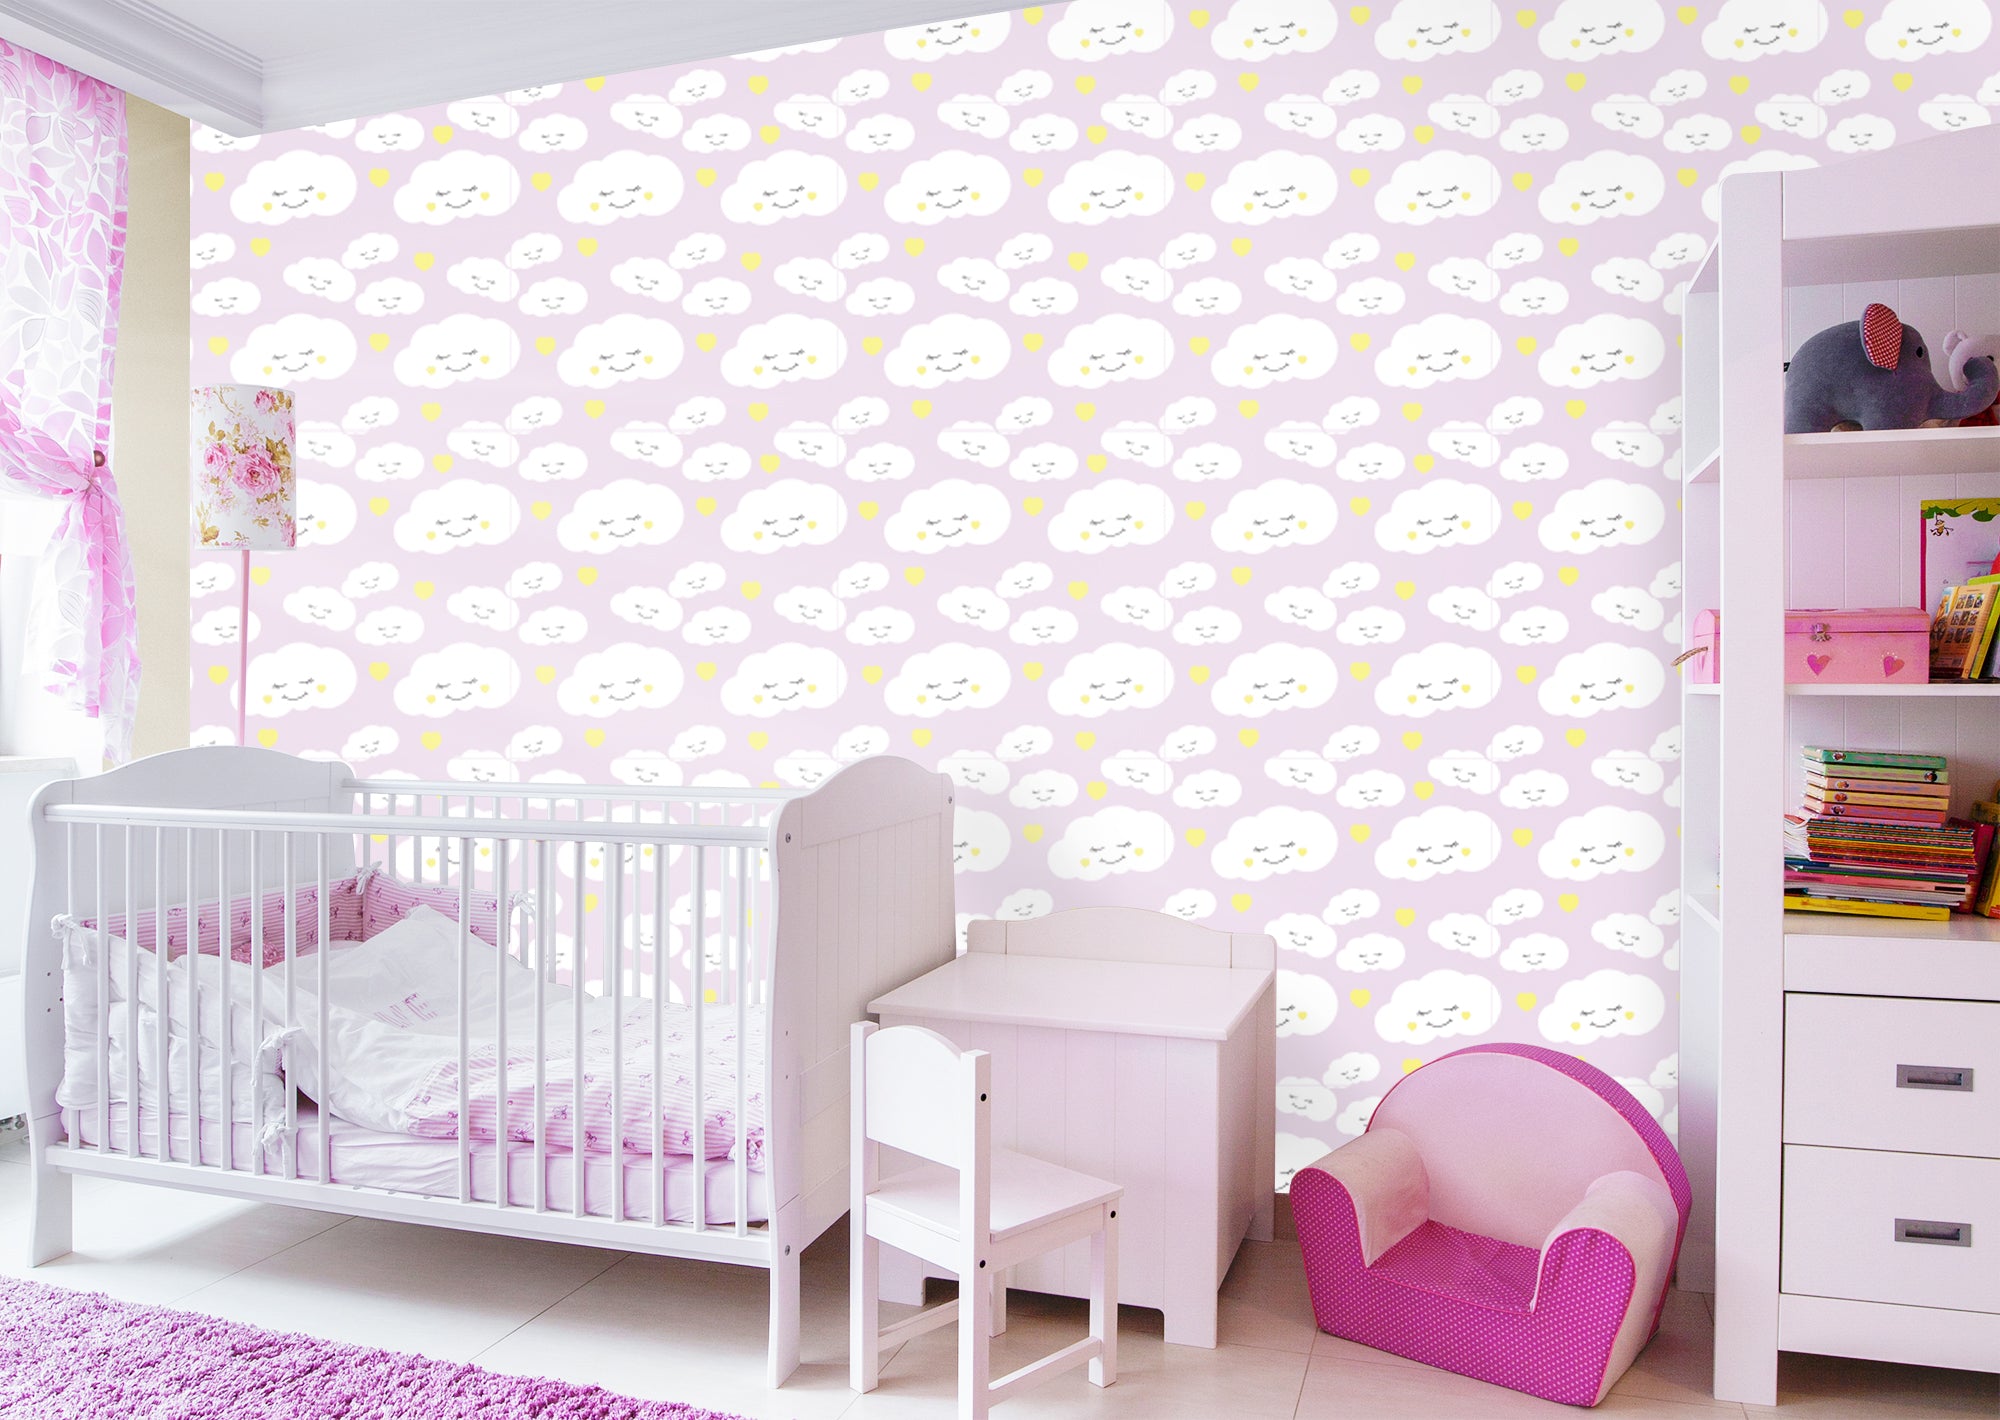 For Crying Out Cloud - Removable Peel & Stick Wallpaper 24" x 48" (8 sf) by Fathead